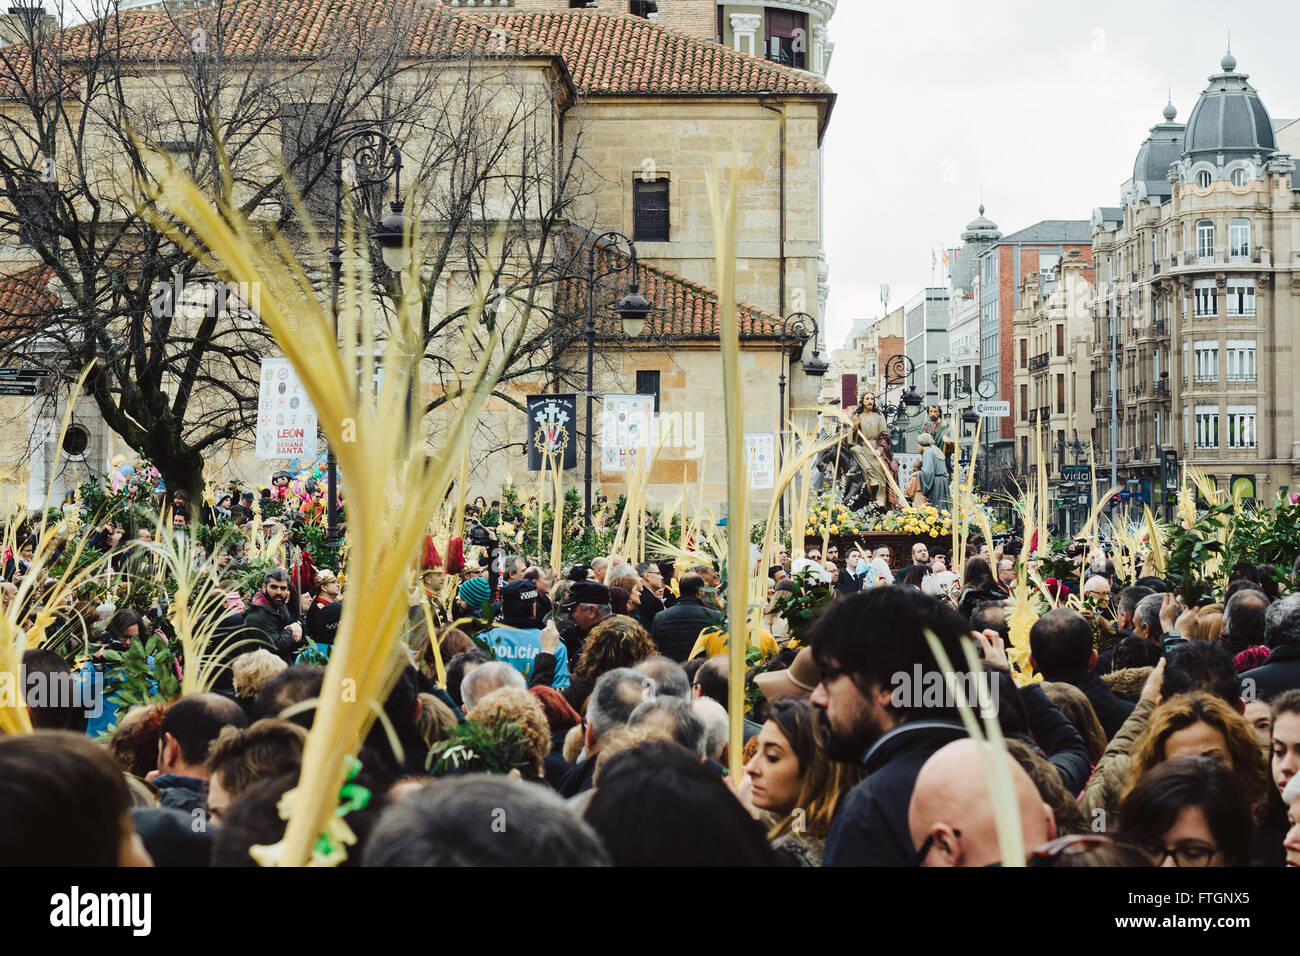 Palm Sunday procession in León, Spain. People carrying palms and looking at the float with Jesus and the donkey. Stock Photo